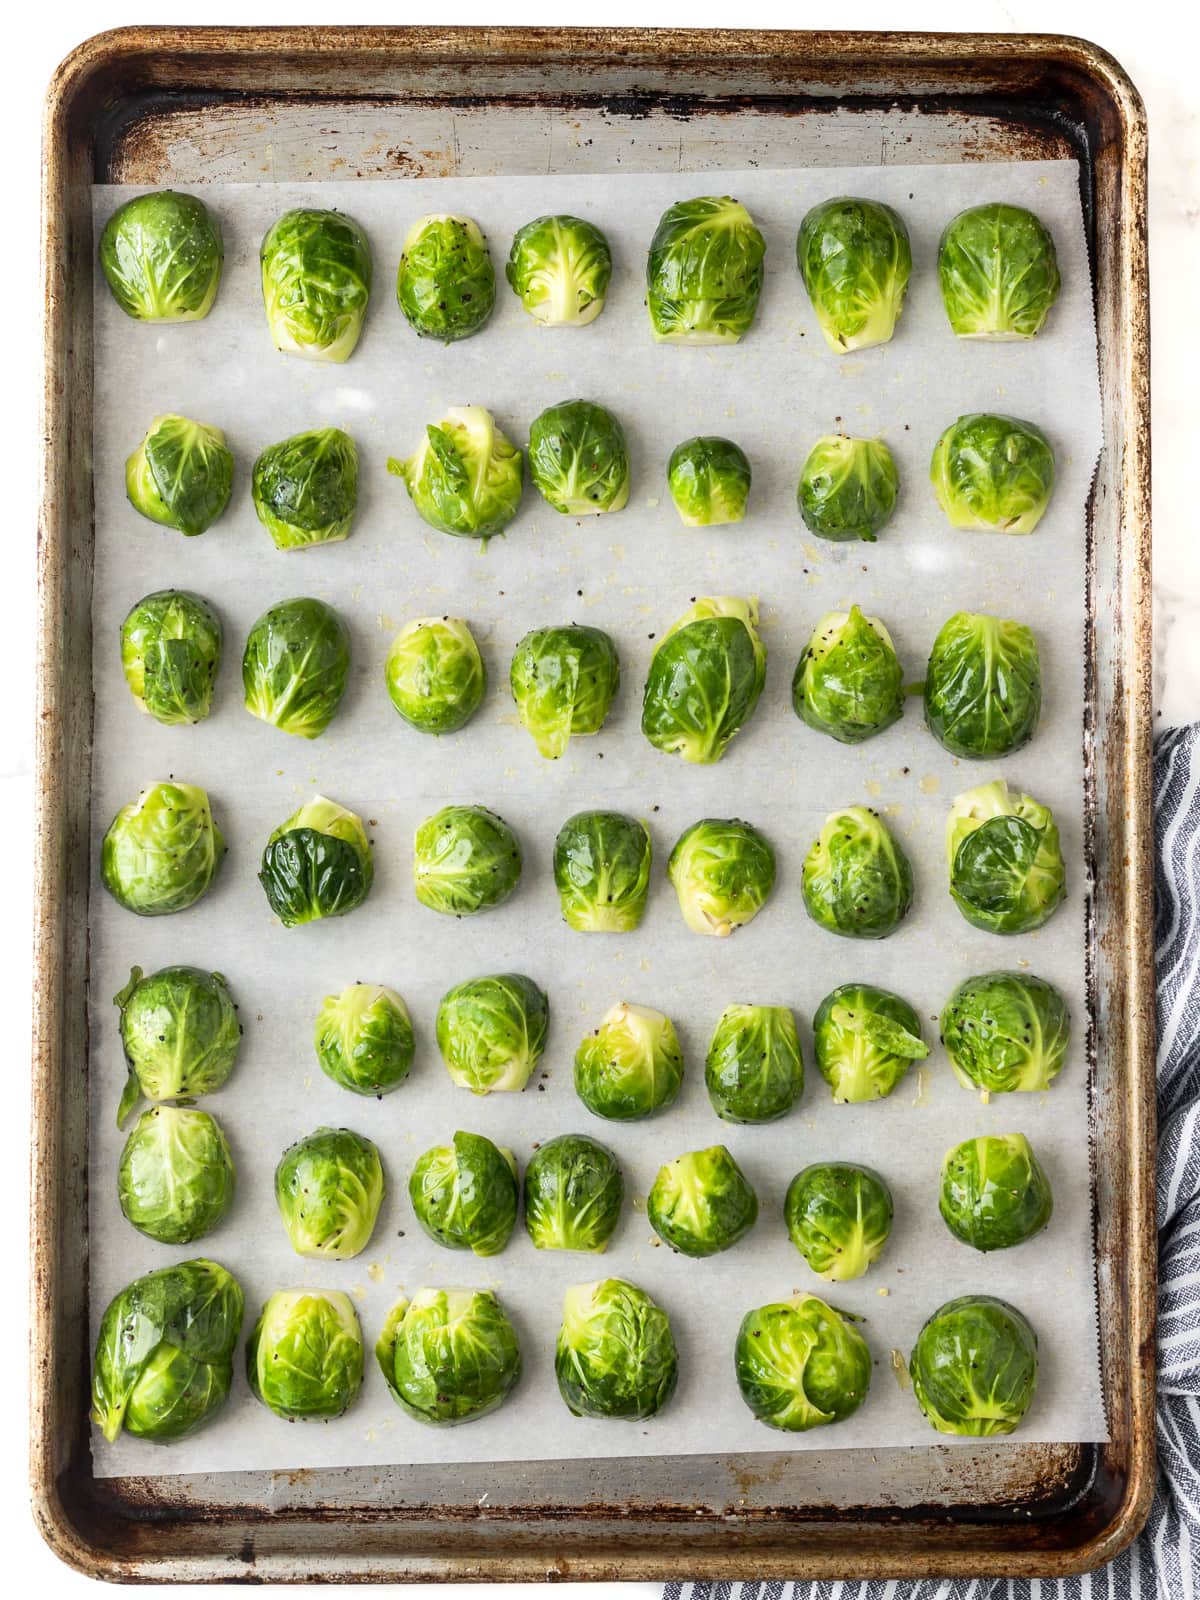 Brussels sprout halves lined up on a baking sheet.